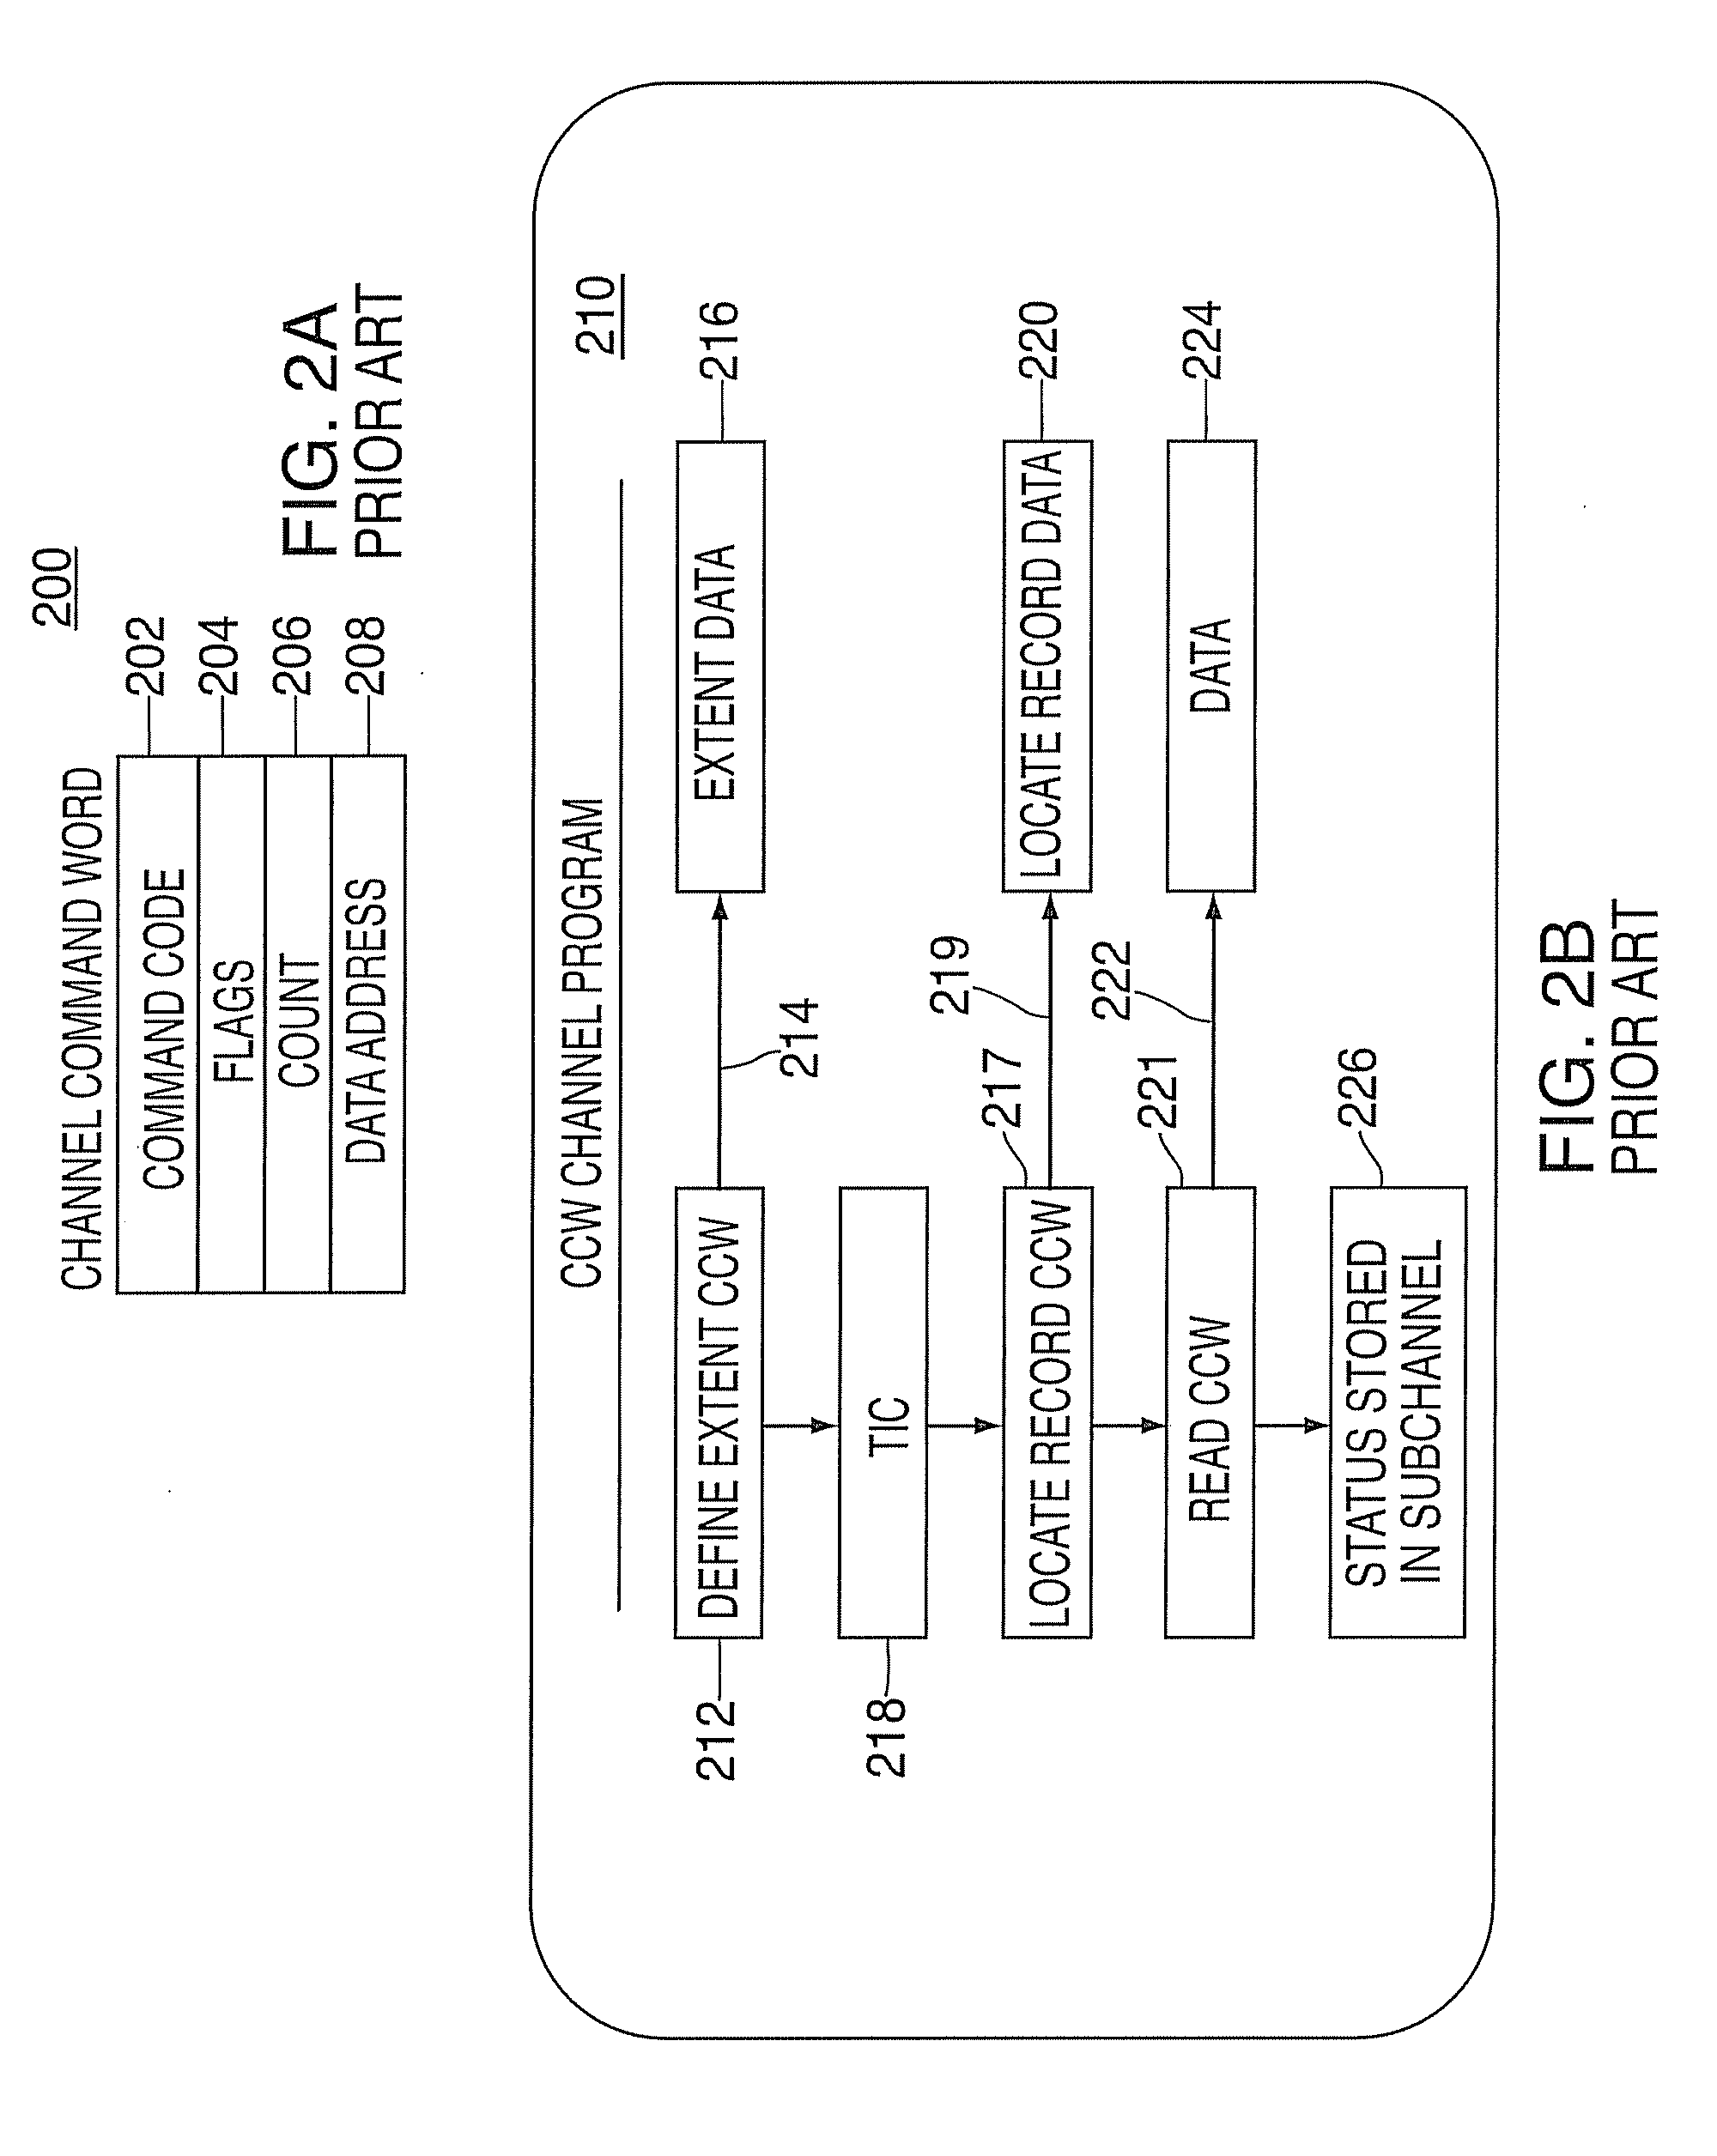 Exception condition handling at a channel subsystem in an I/O processing system